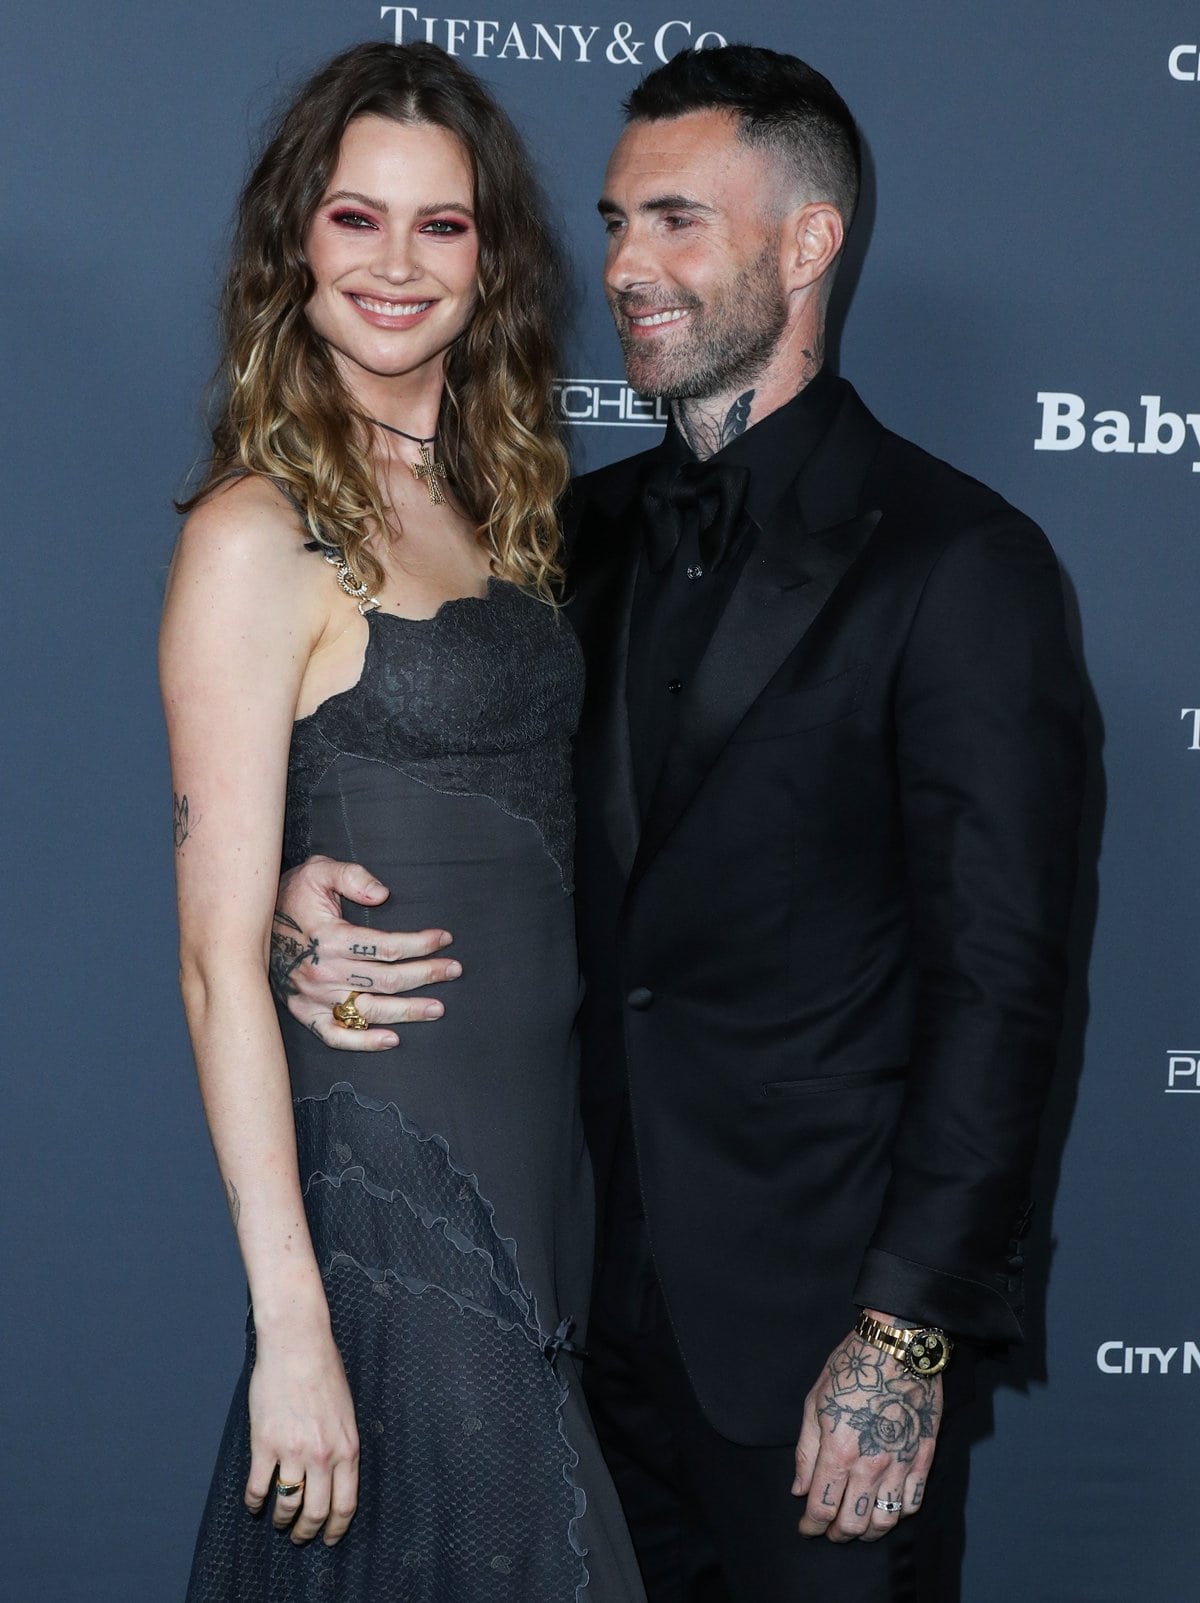 Behati Prinsloo met Adam Levine when he wanted her to star in one of his music videos